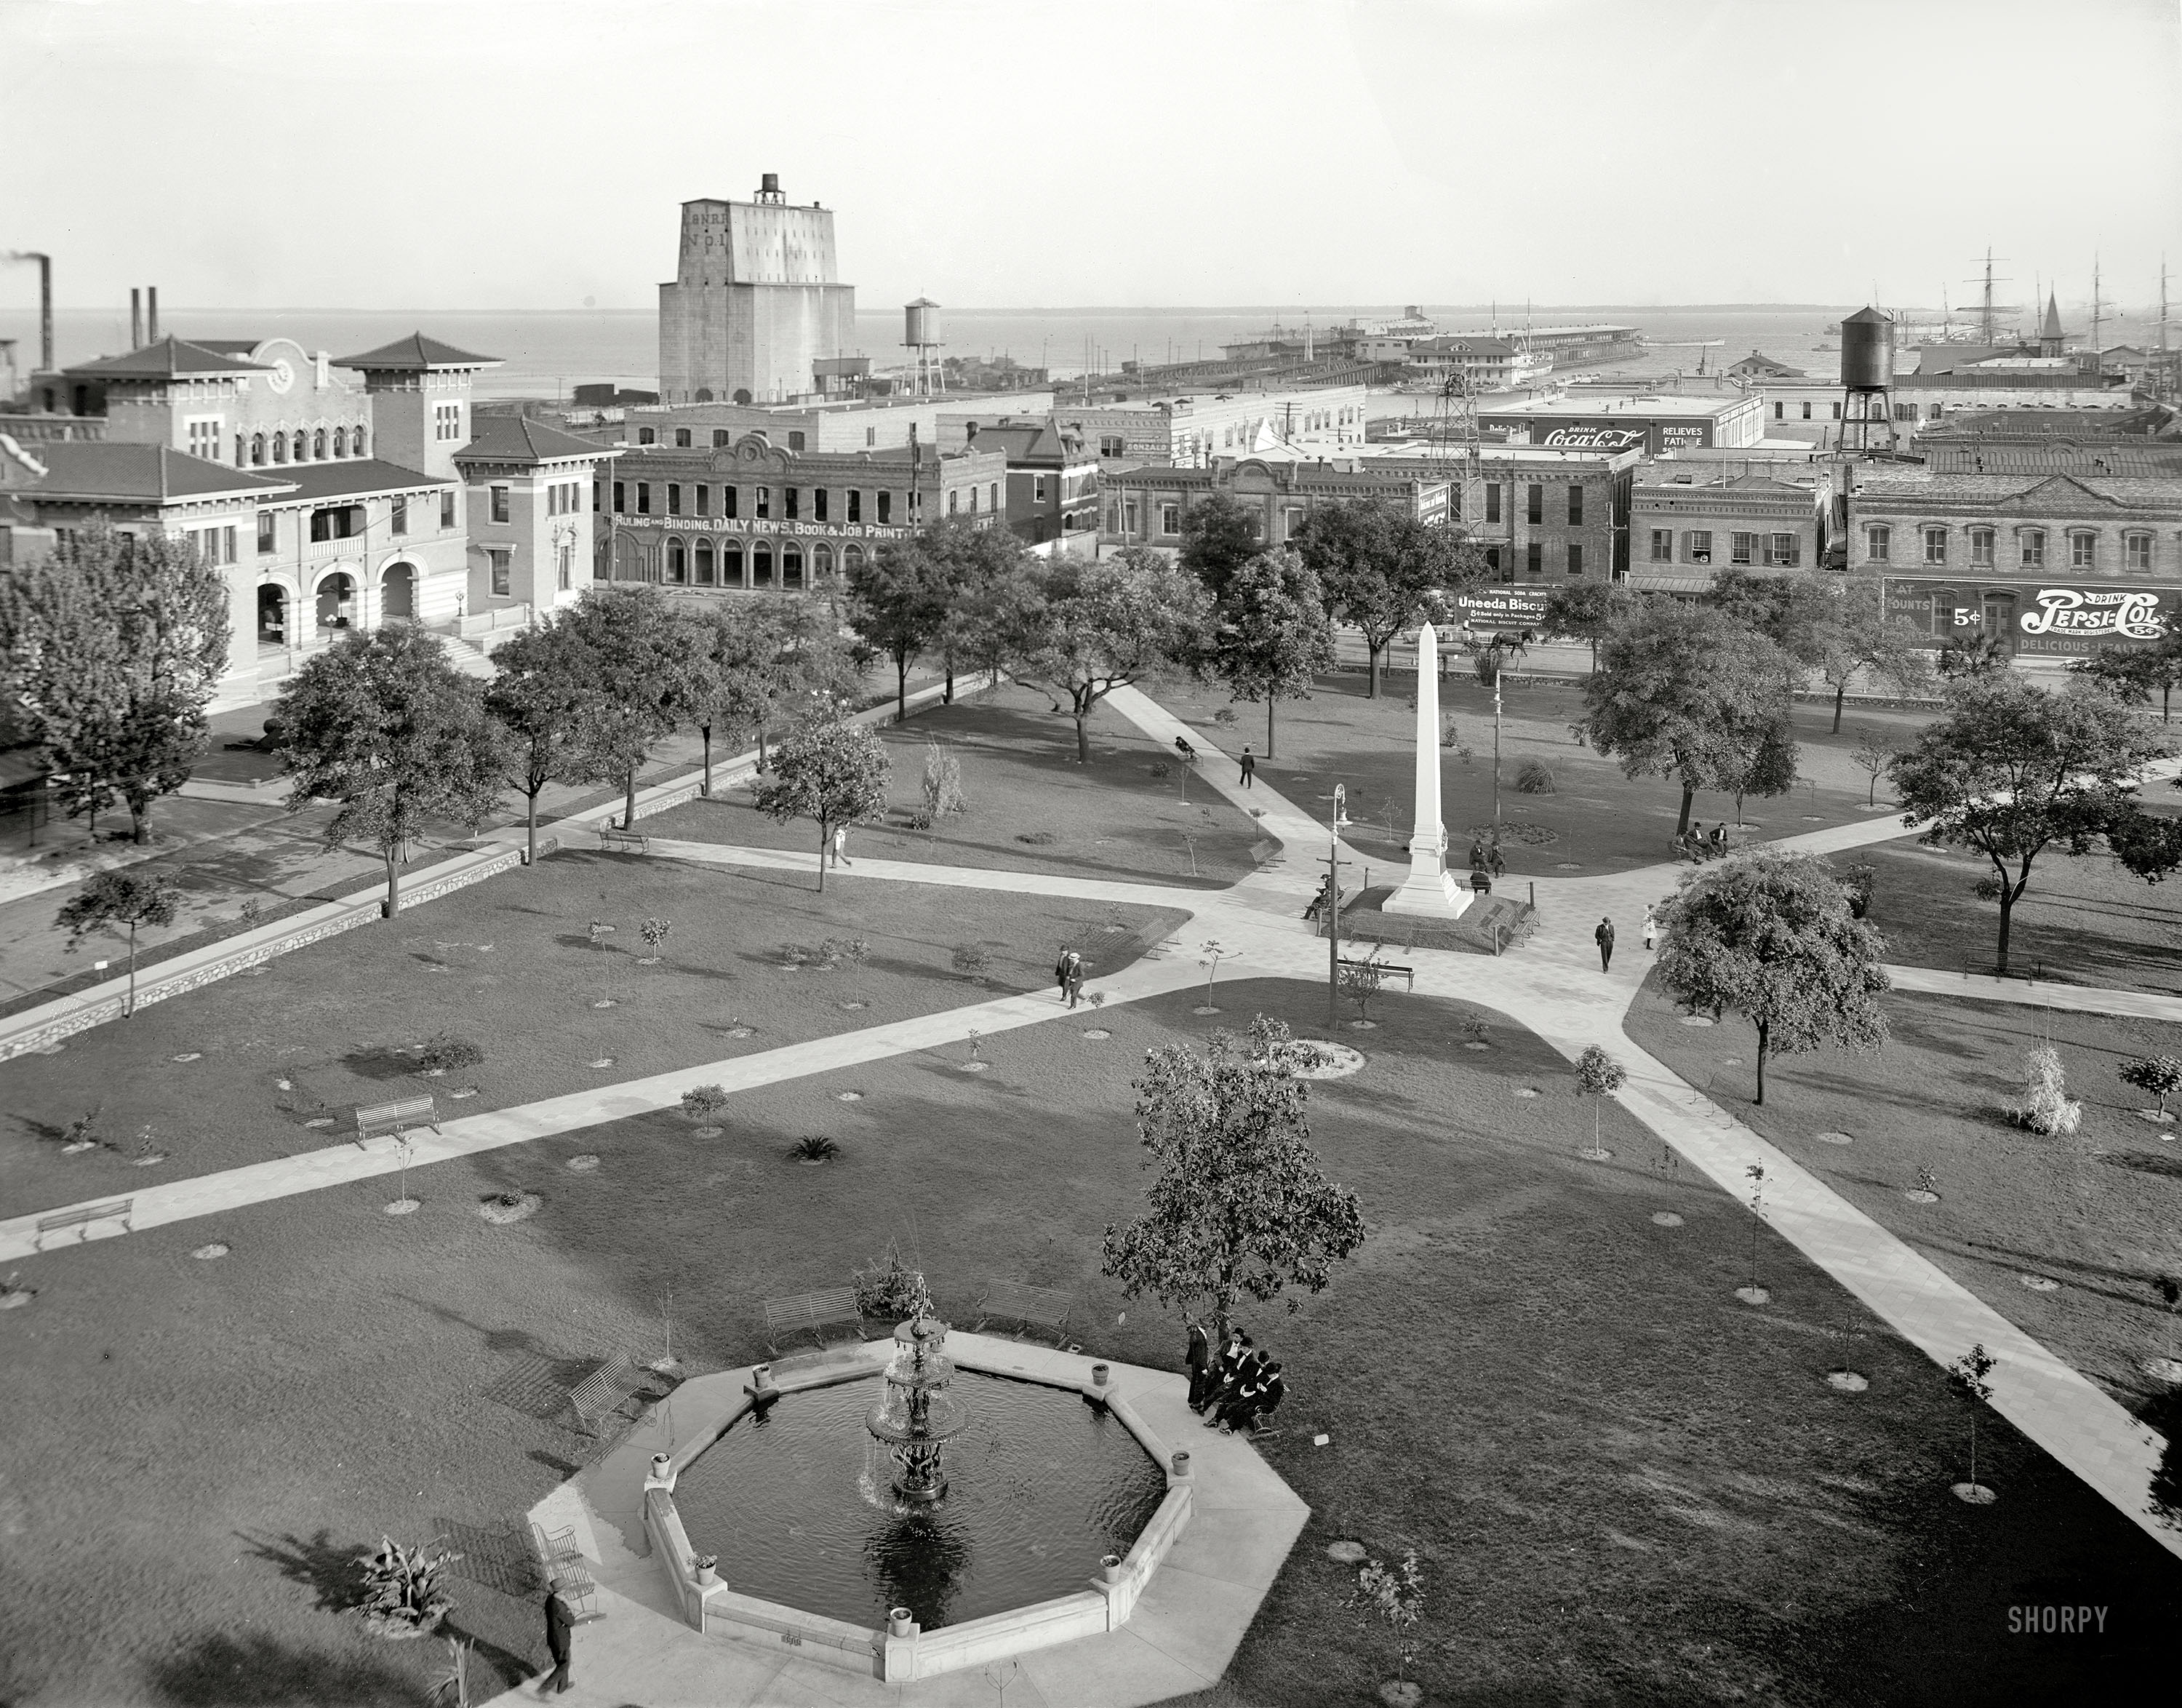 Pensacola, Florida, circa 1910. "Plaza Ferdinand and harbor." Brought to you by Coca-Cola, Pepsi and Uneeda Biscuit. 8x10 glass negative. View full size.